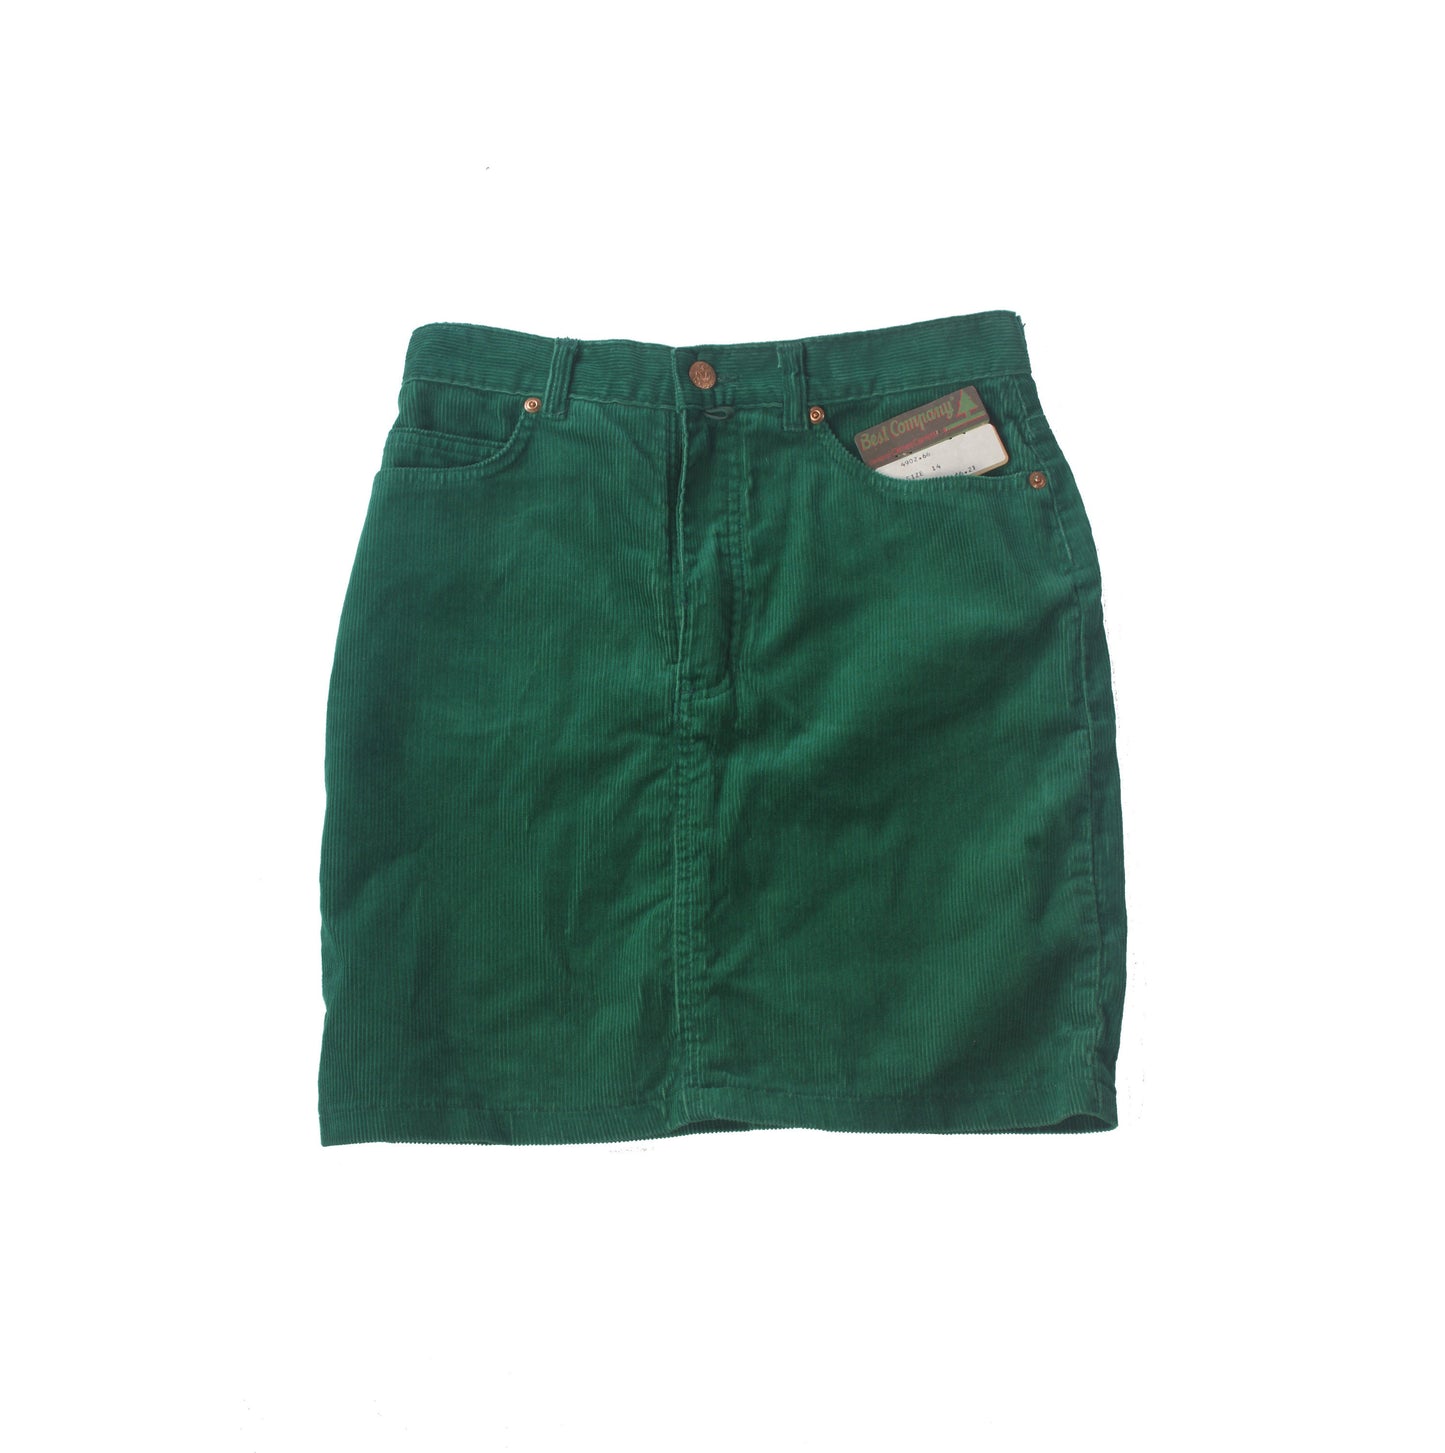 Best Company 80s corduroy velvet mini skirts, available in green and grey color, new old stock with tags, sizes 27,28,29